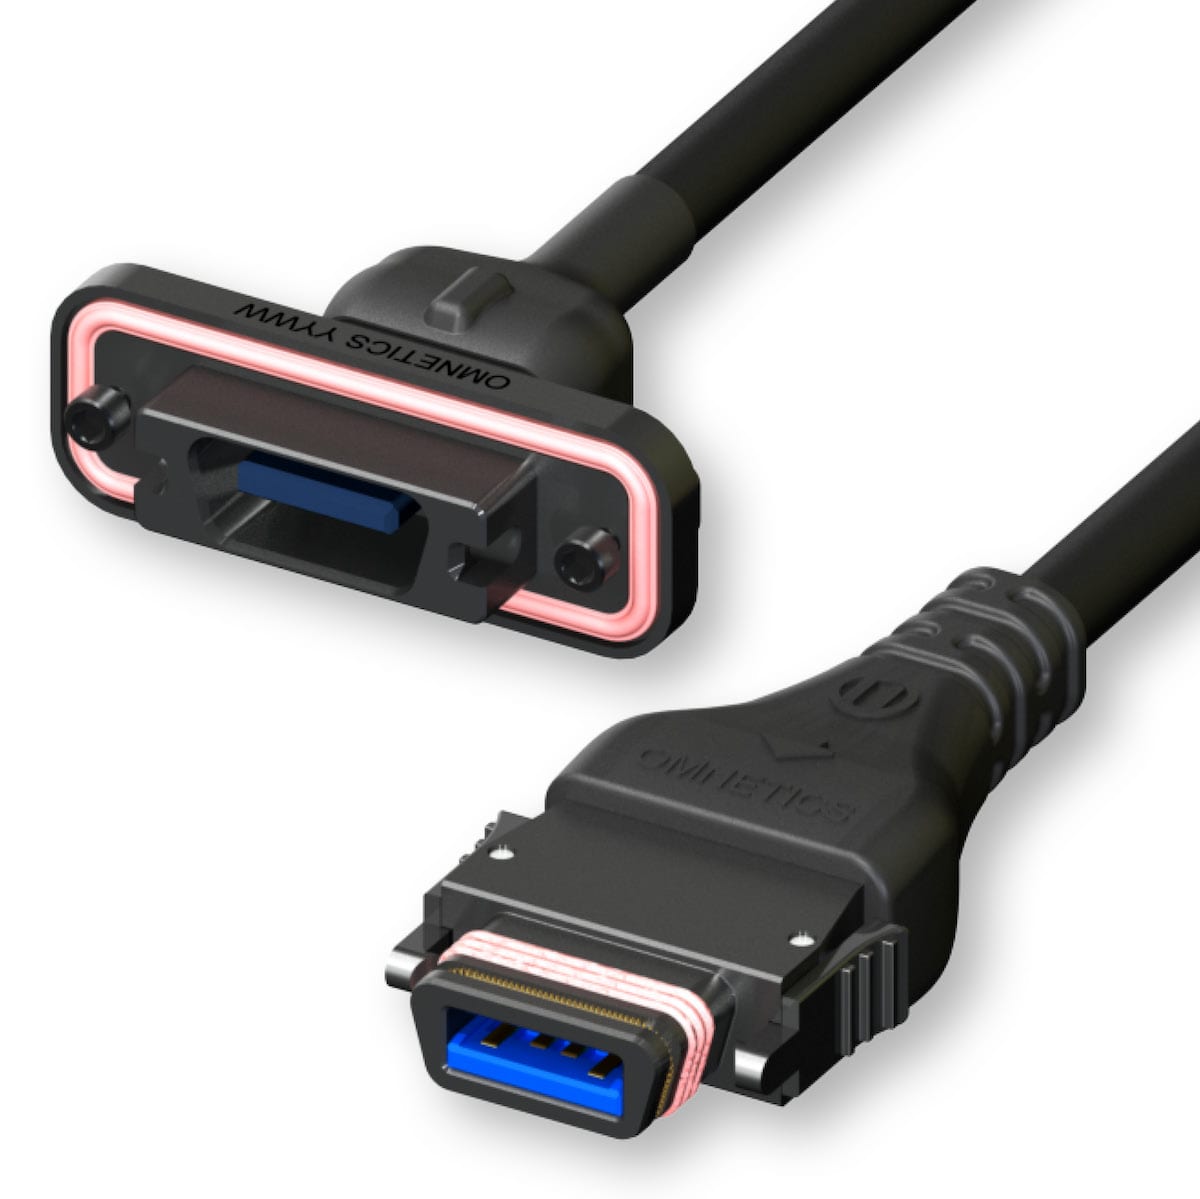 Omnetics Connector Corporation’s Quick Lock USB 3.0 Micro-D Connector Series